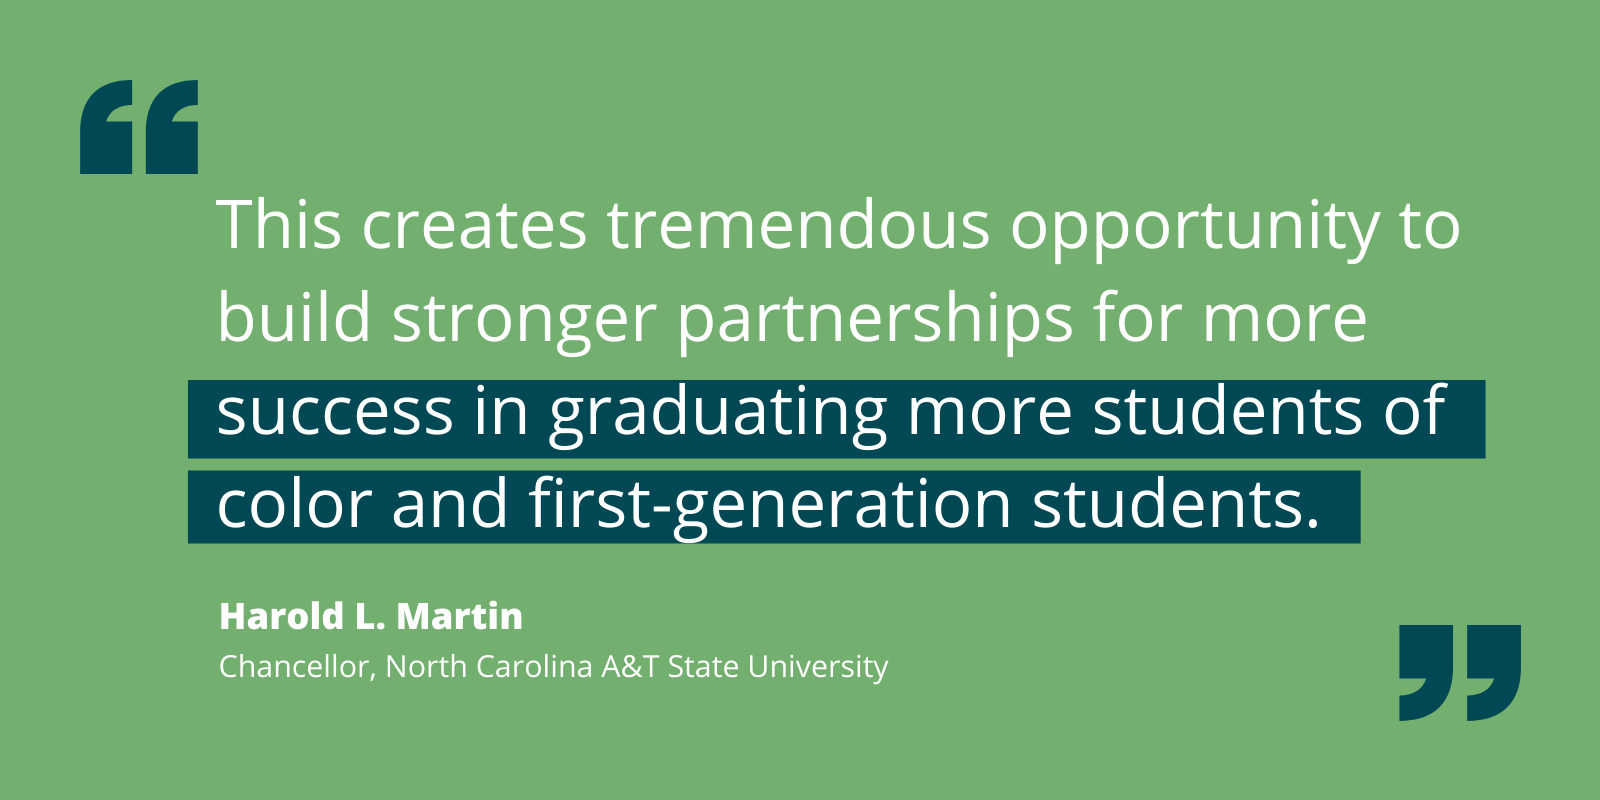 Quote by Harold Martin about UIA's resources creating more graduation opportunities for first-gen and students of color.